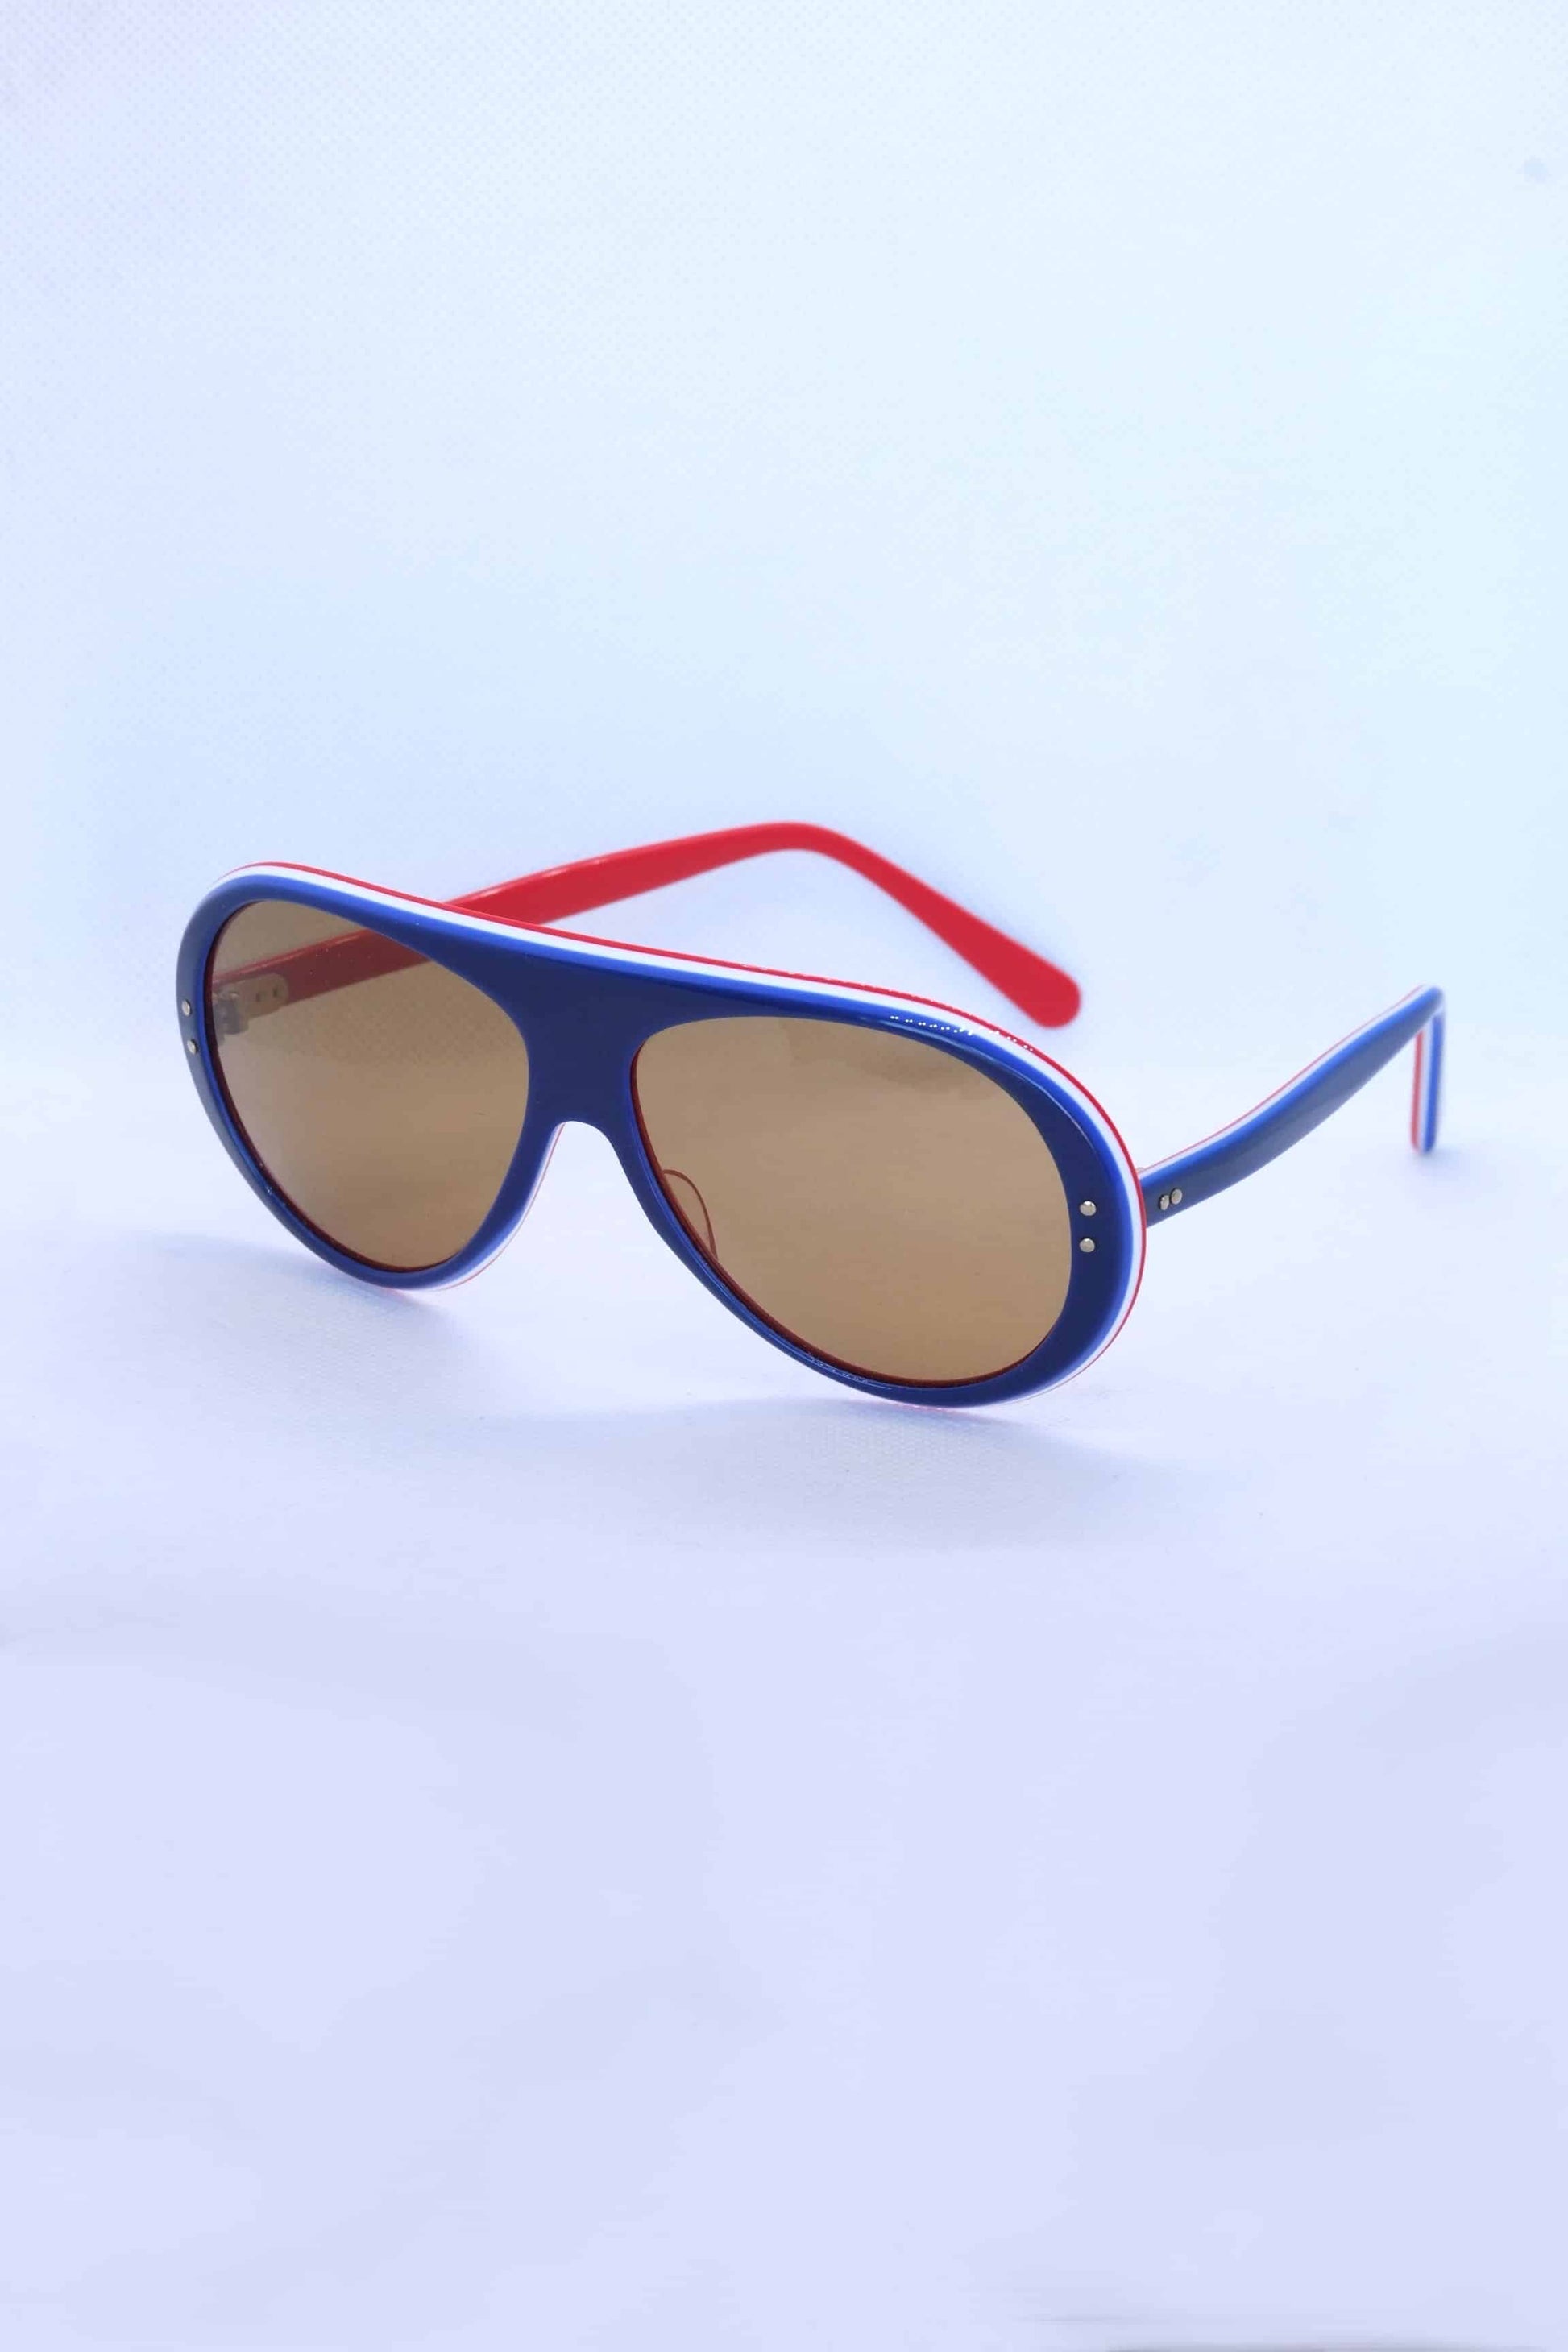 Vintage 70's Rally Coq Sunglasses in blue on white background